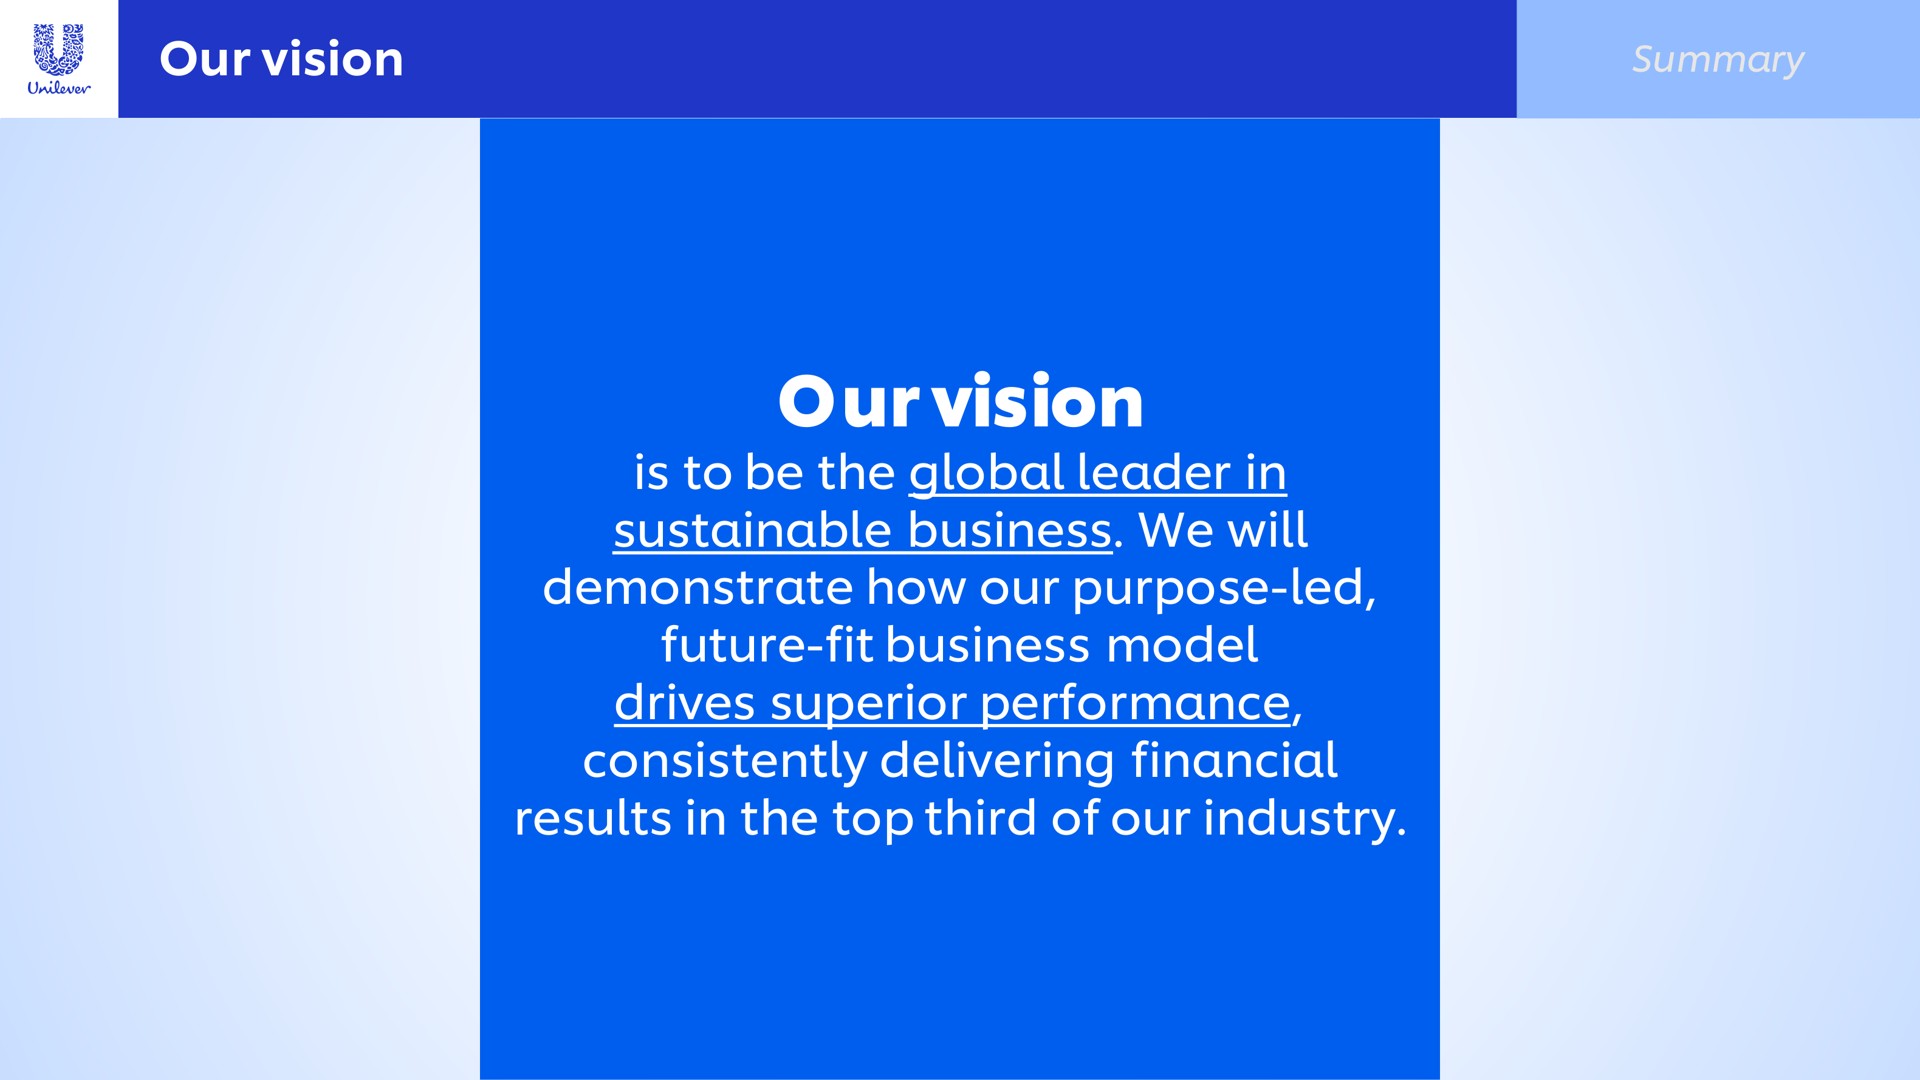 our vision our vision is to be the global leader in sustainable business we will demonstrate how our purpose led future fit business model drives superior performance consistently delivering financial results in the top third of our industry | Unilever